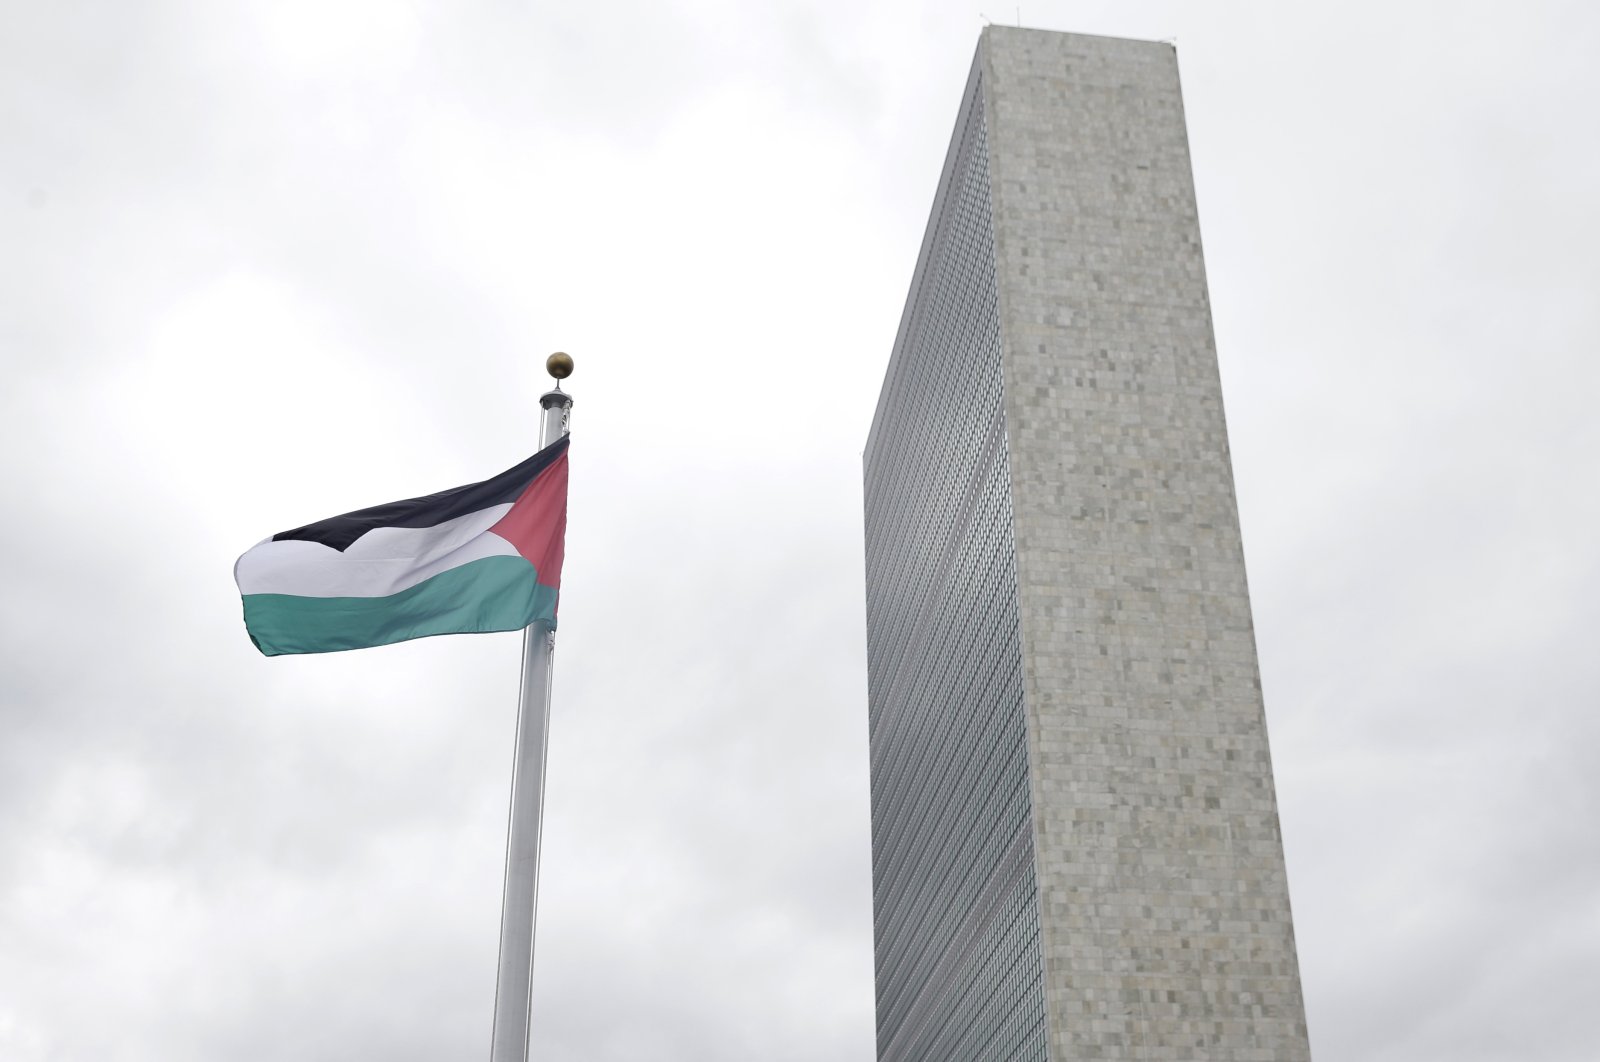 The State of Palestine flag flies for the first time at U.N. headquarters, New York, U.S., Sept. 30, 2015. (AP Photo)